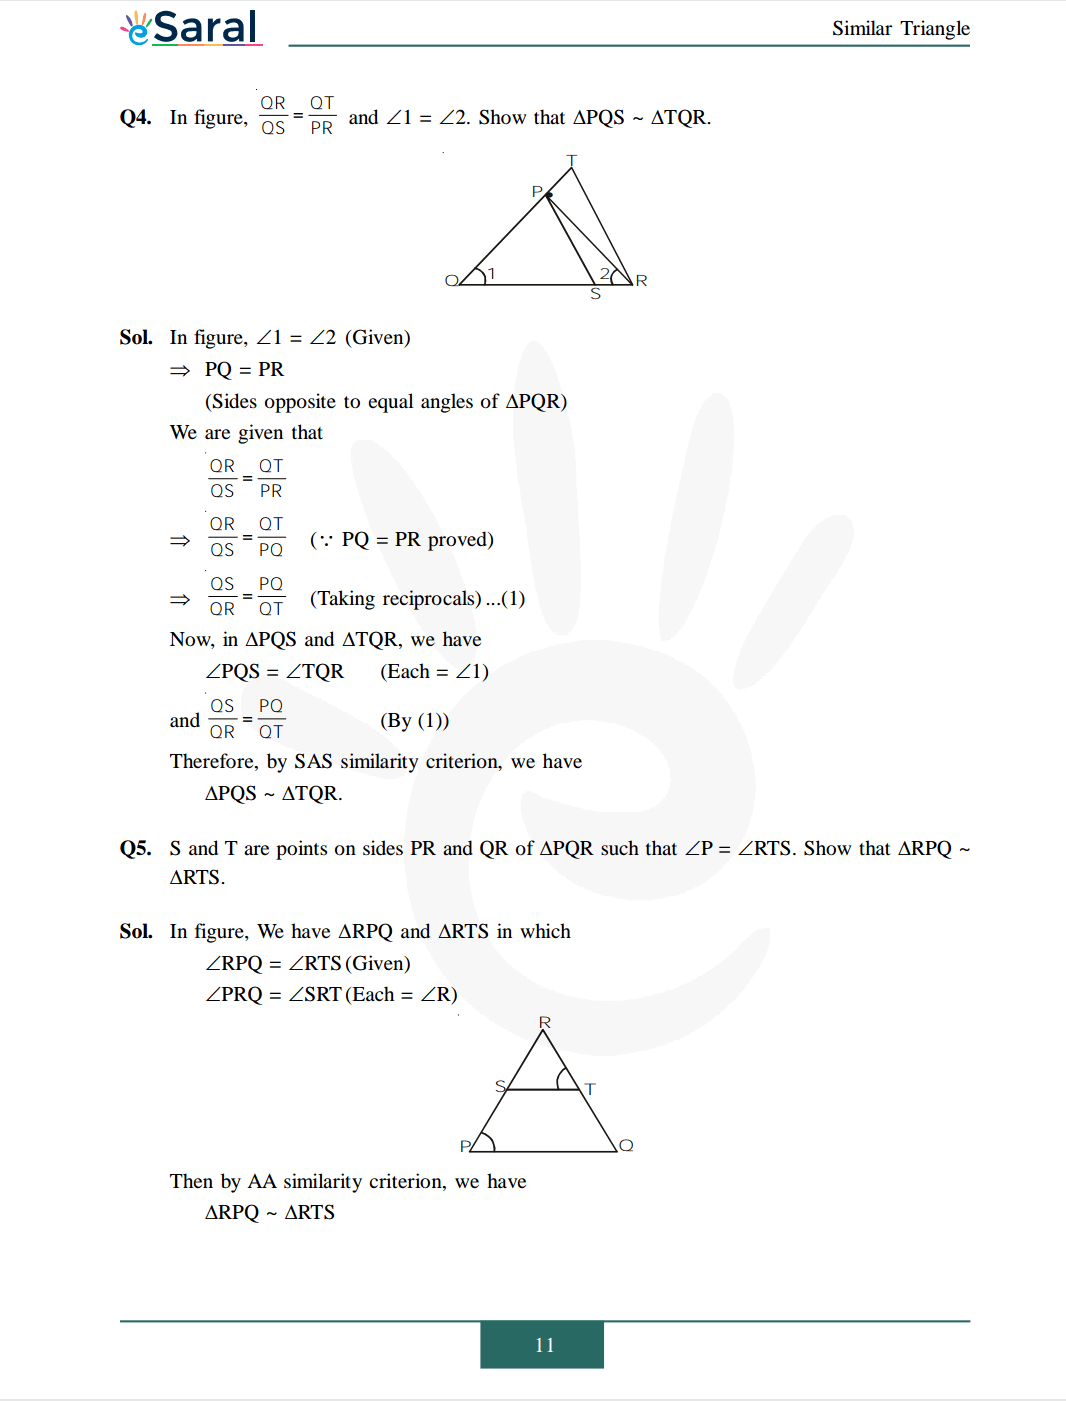 Class 10 Maths Chapter 6 exercise 6.3 solutions Image 4